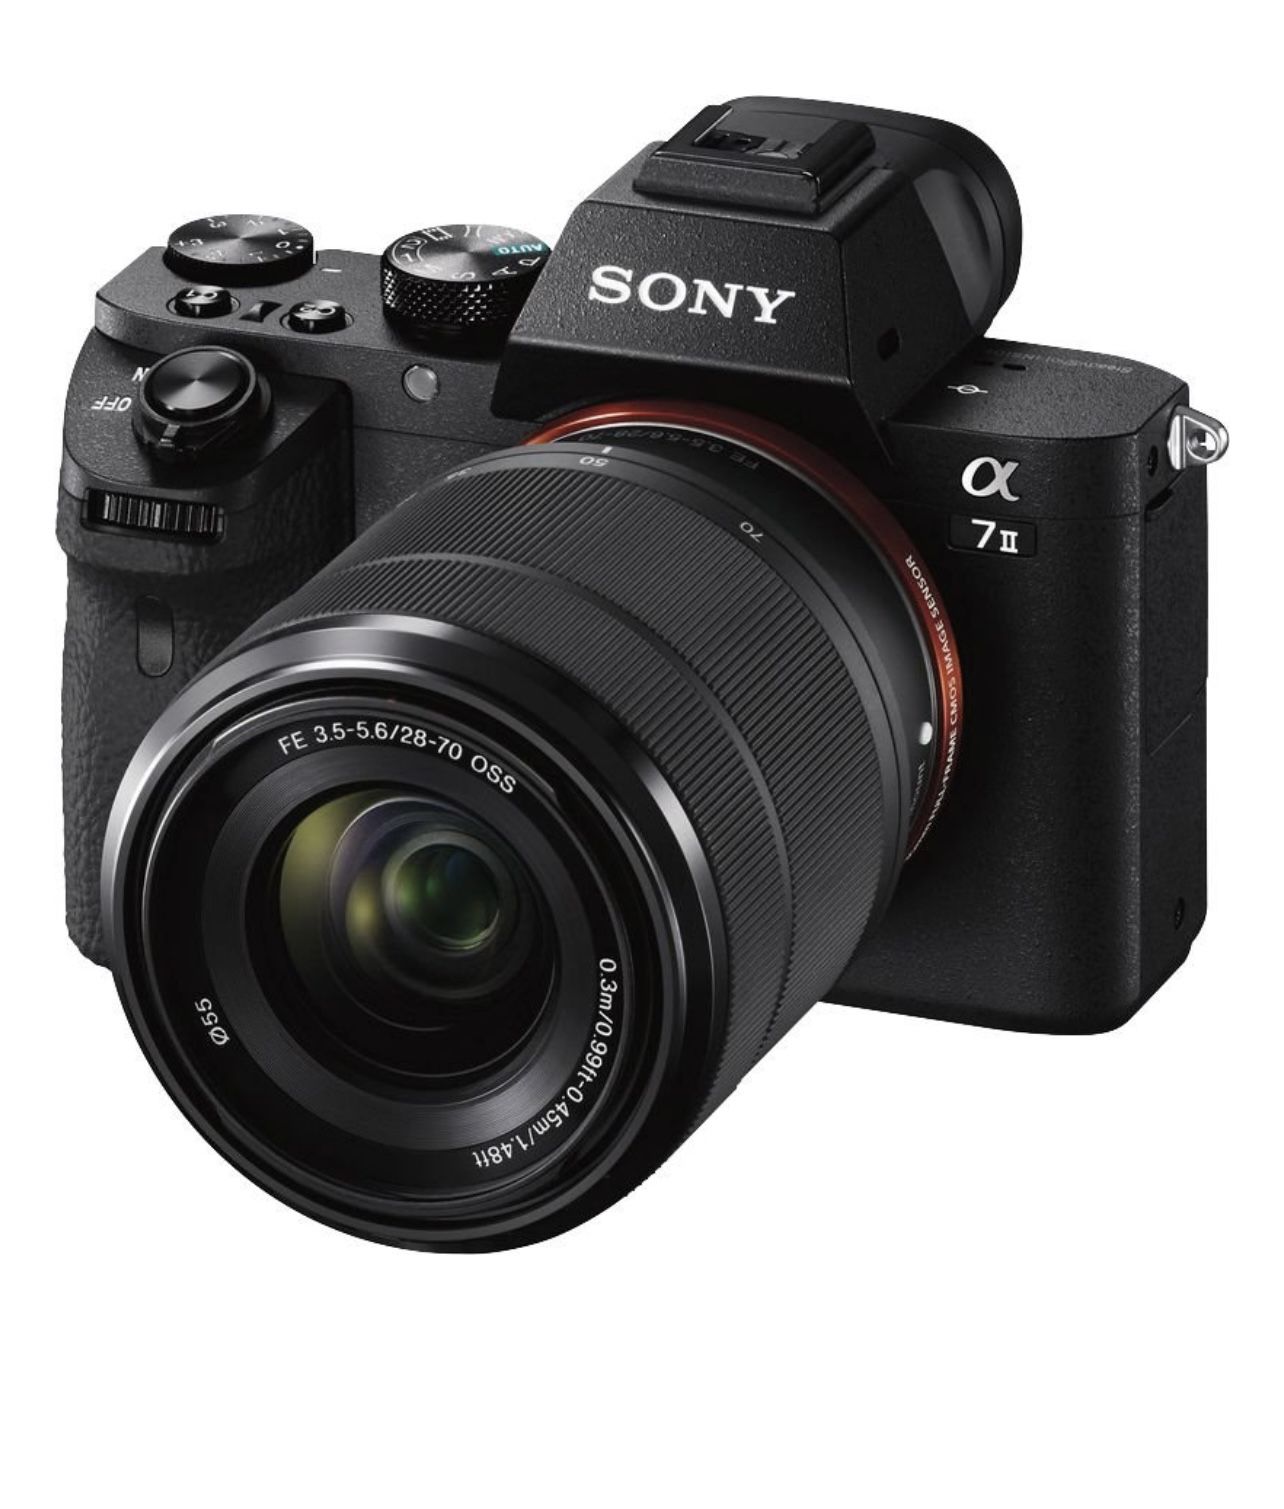 Sony - Alpha 7 II Full-Frame Mirrorless Video Camera with 28-70mm Lens